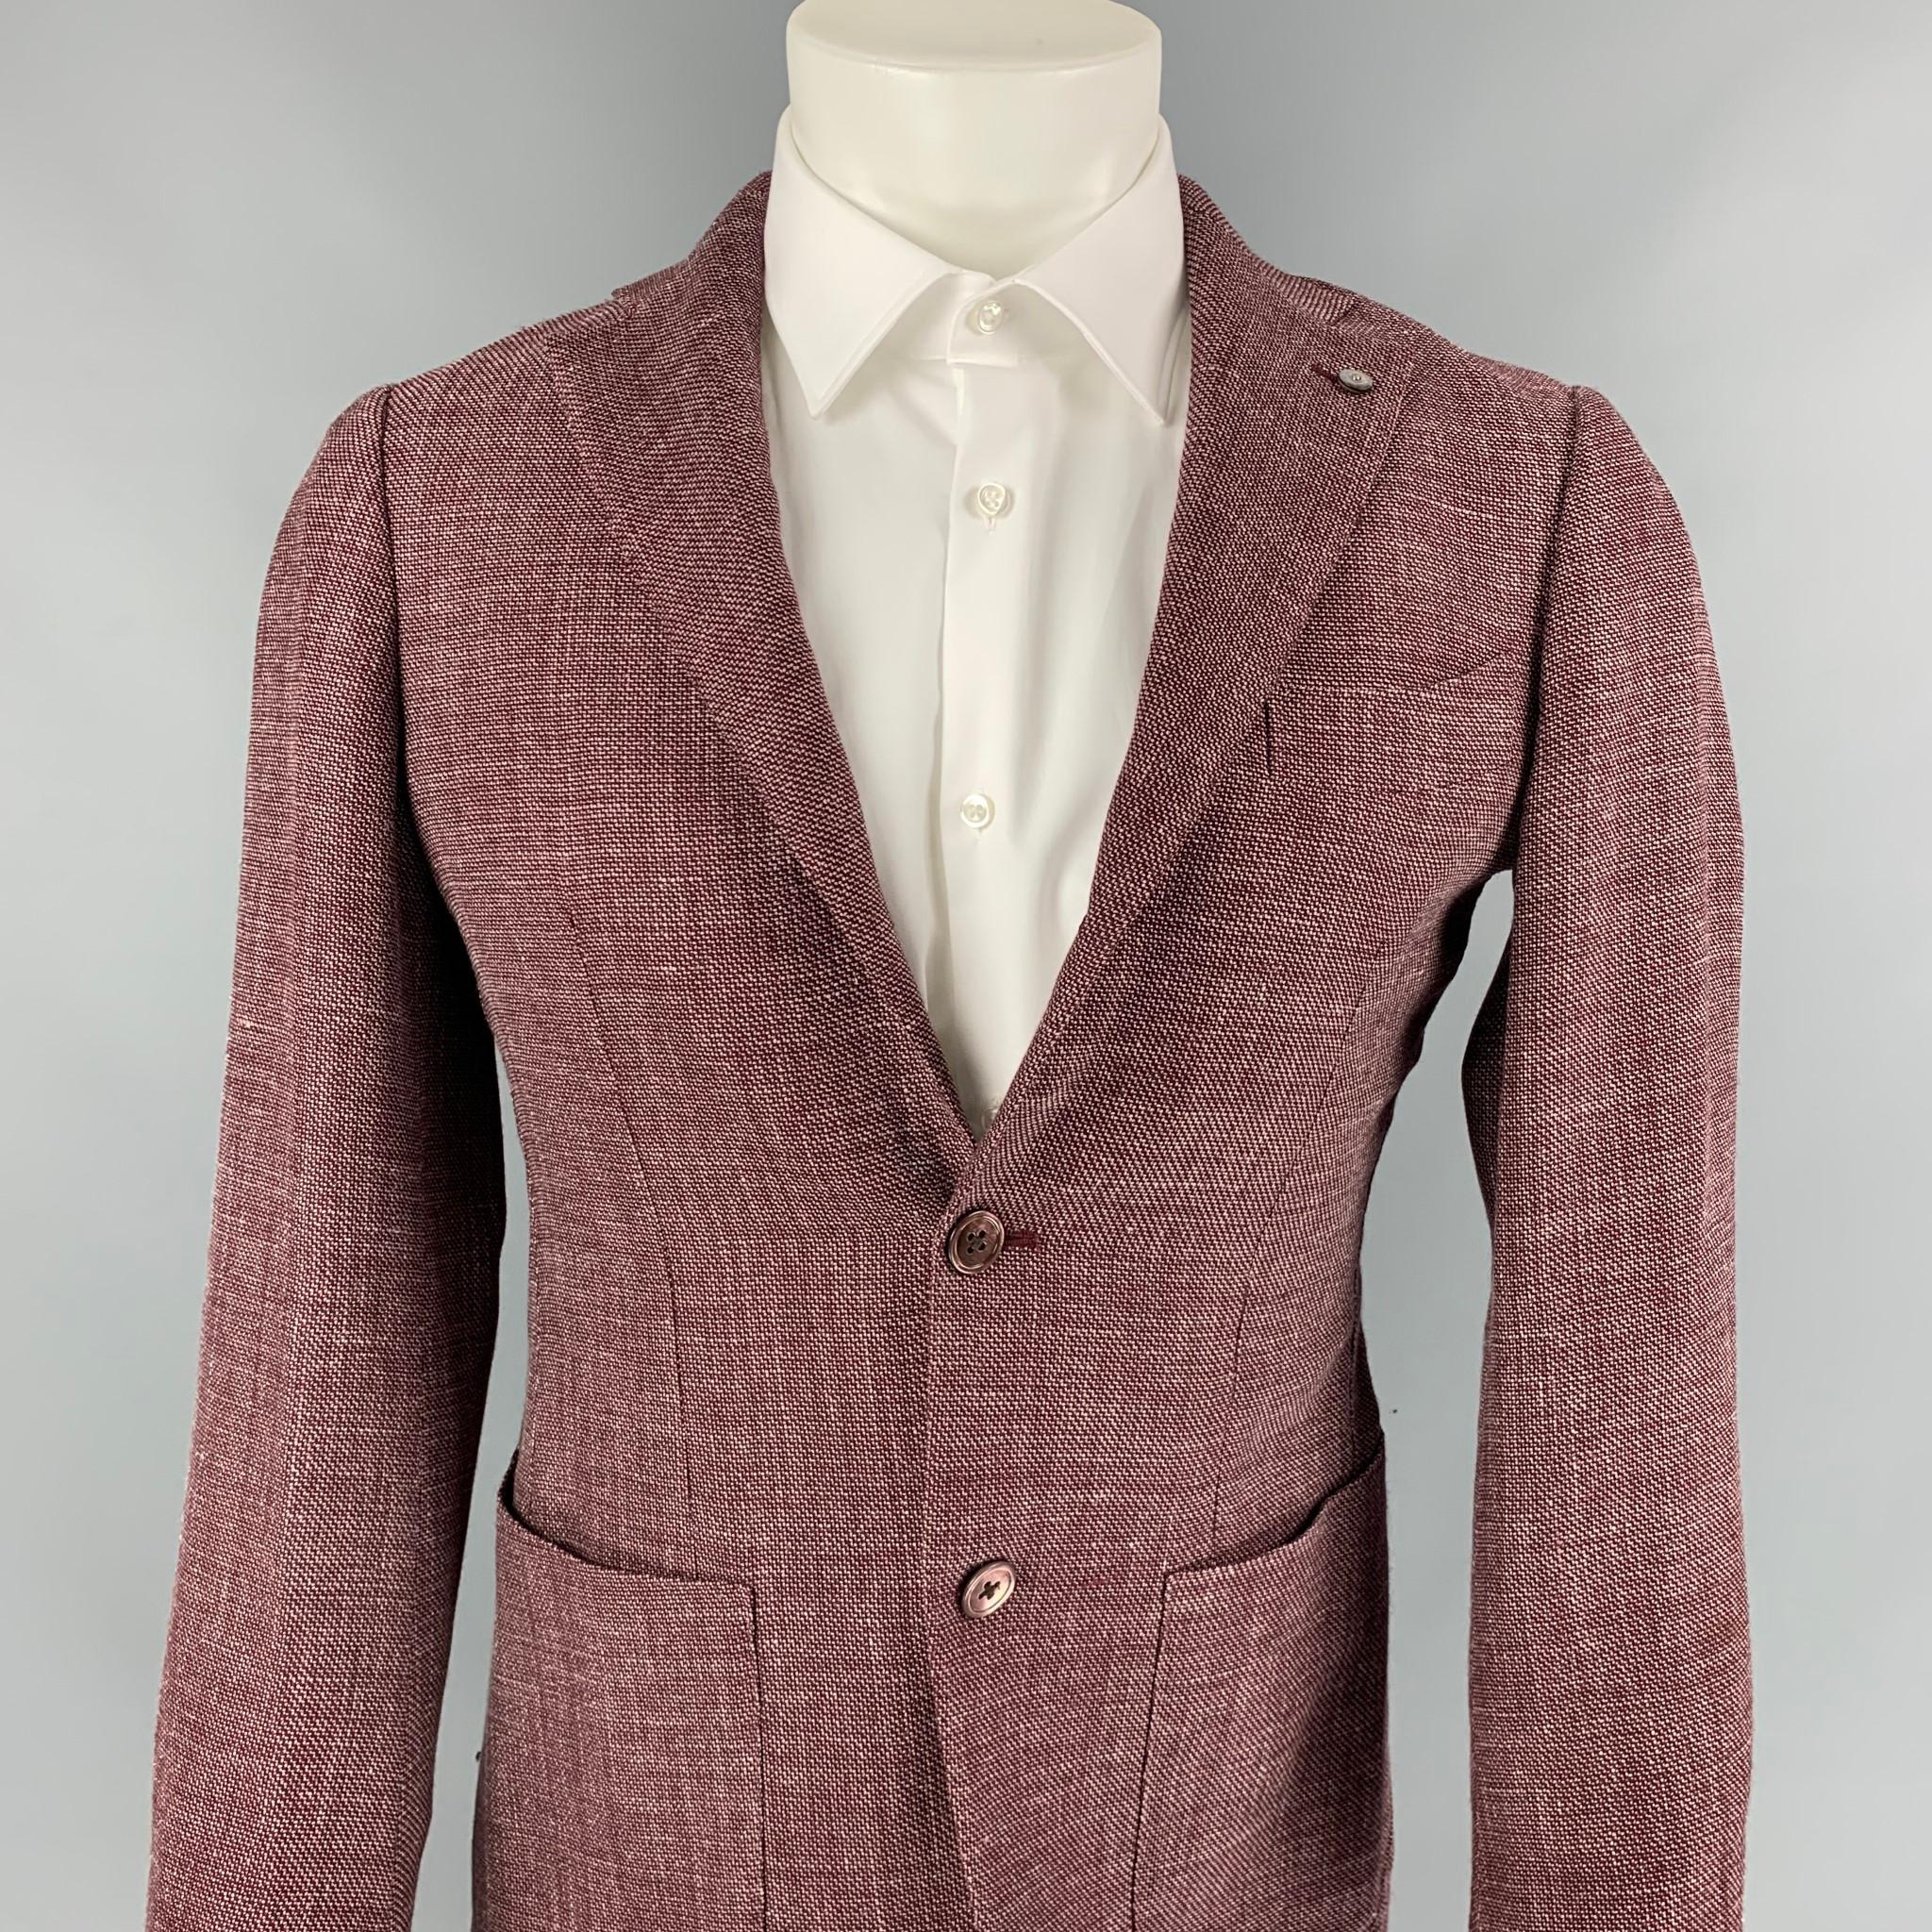 BRILLA sport coat comes in a burgundy & pink woven material with a half liner featuring a notch lapel, double back vent, pin detail, patch pockets, and a three button closure. 

Very Good Pre-Owned Condition.
Marked: 44

Measurements:

Shoulder: